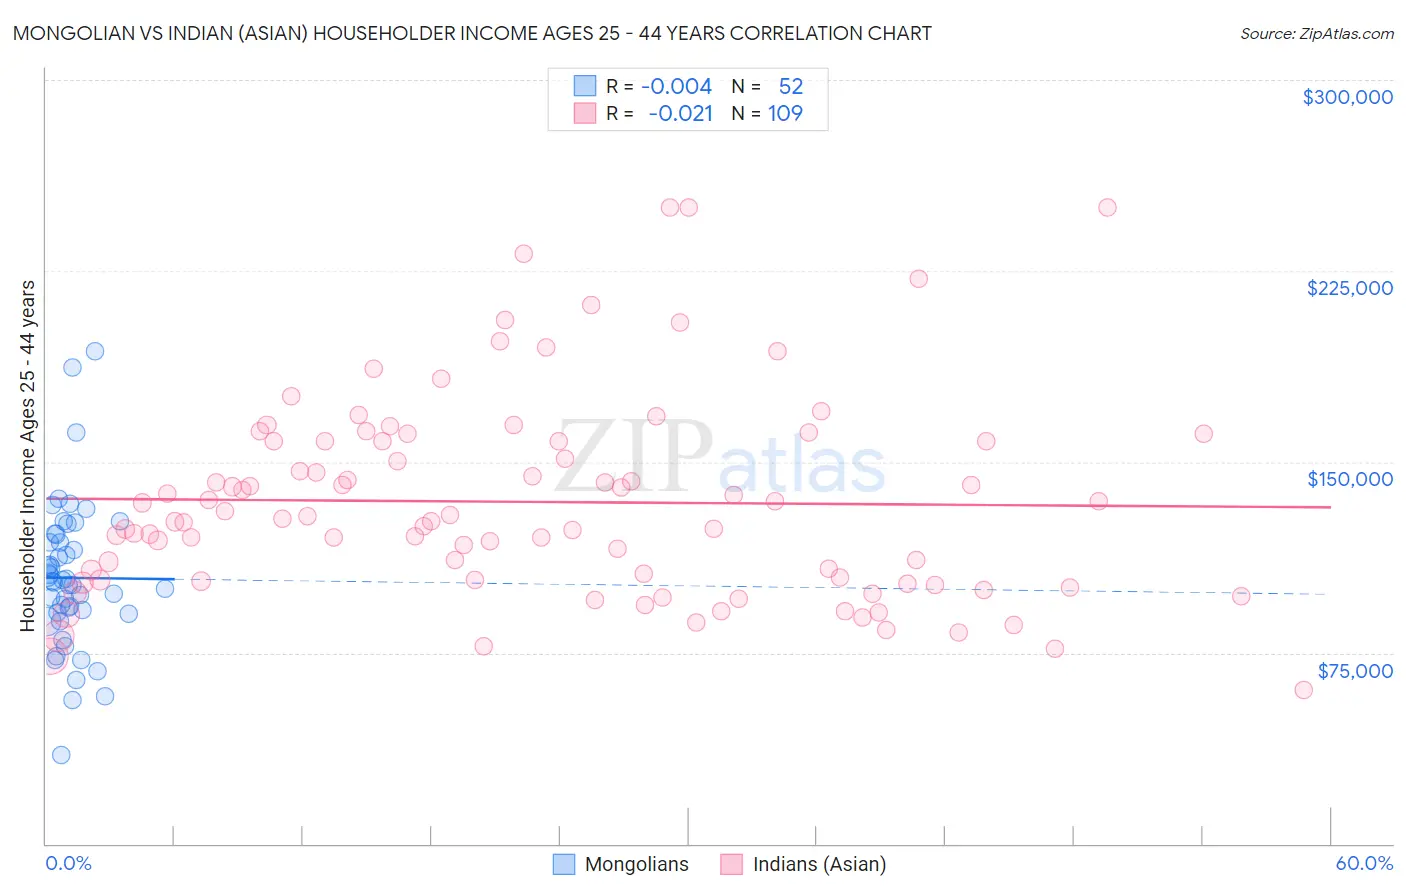 Mongolian vs Indian (Asian) Householder Income Ages 25 - 44 years